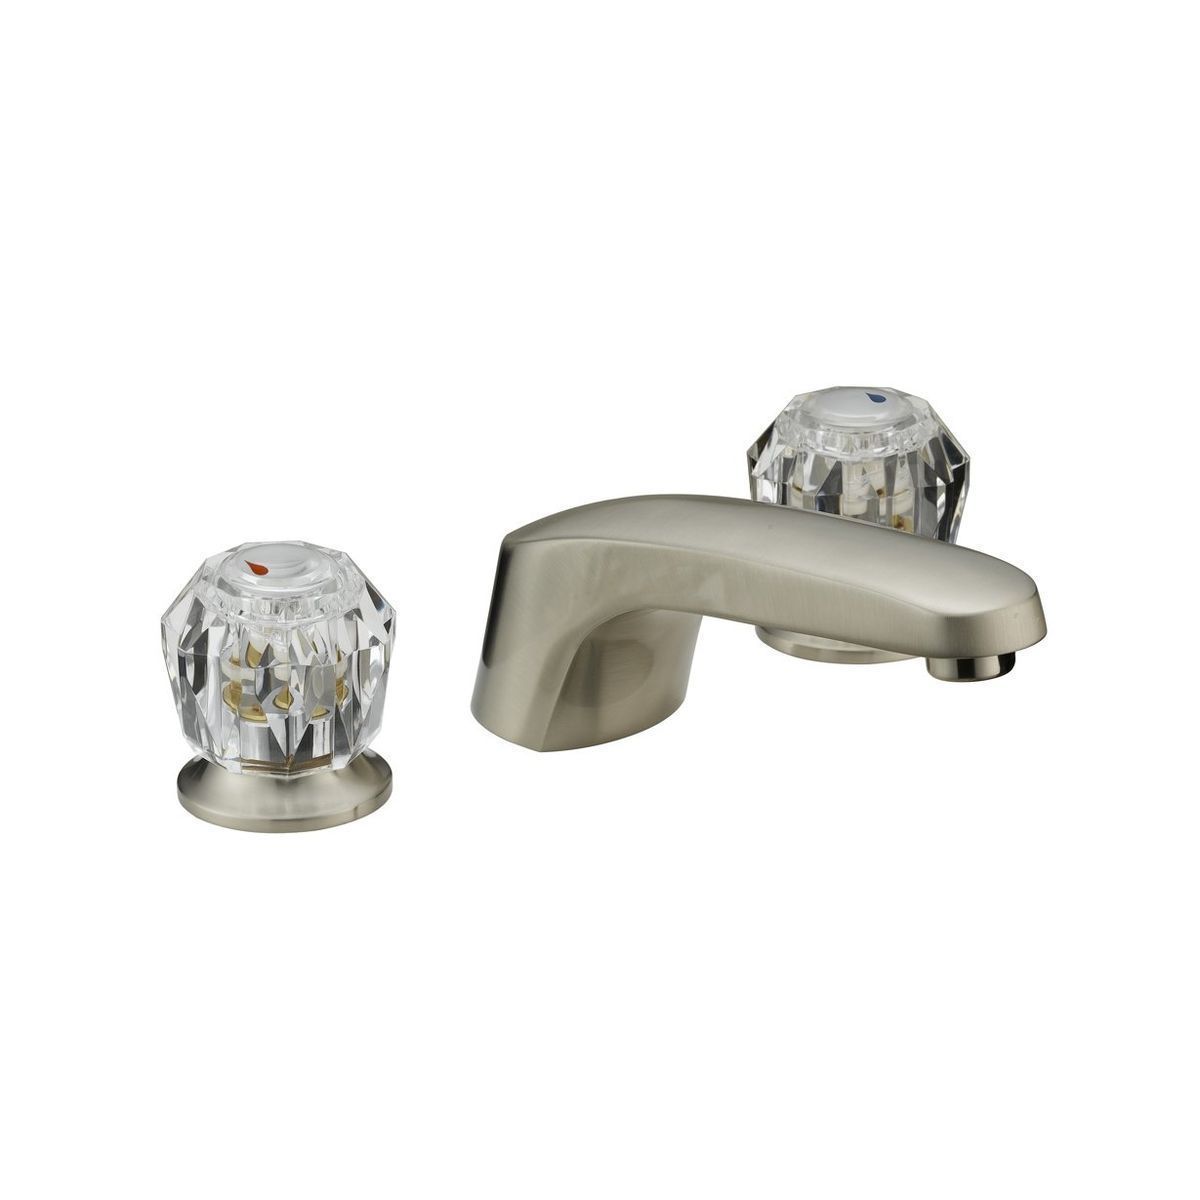 Style Cl 902 Classic Two Handle Roman Tub Faucet Brushed Nicke